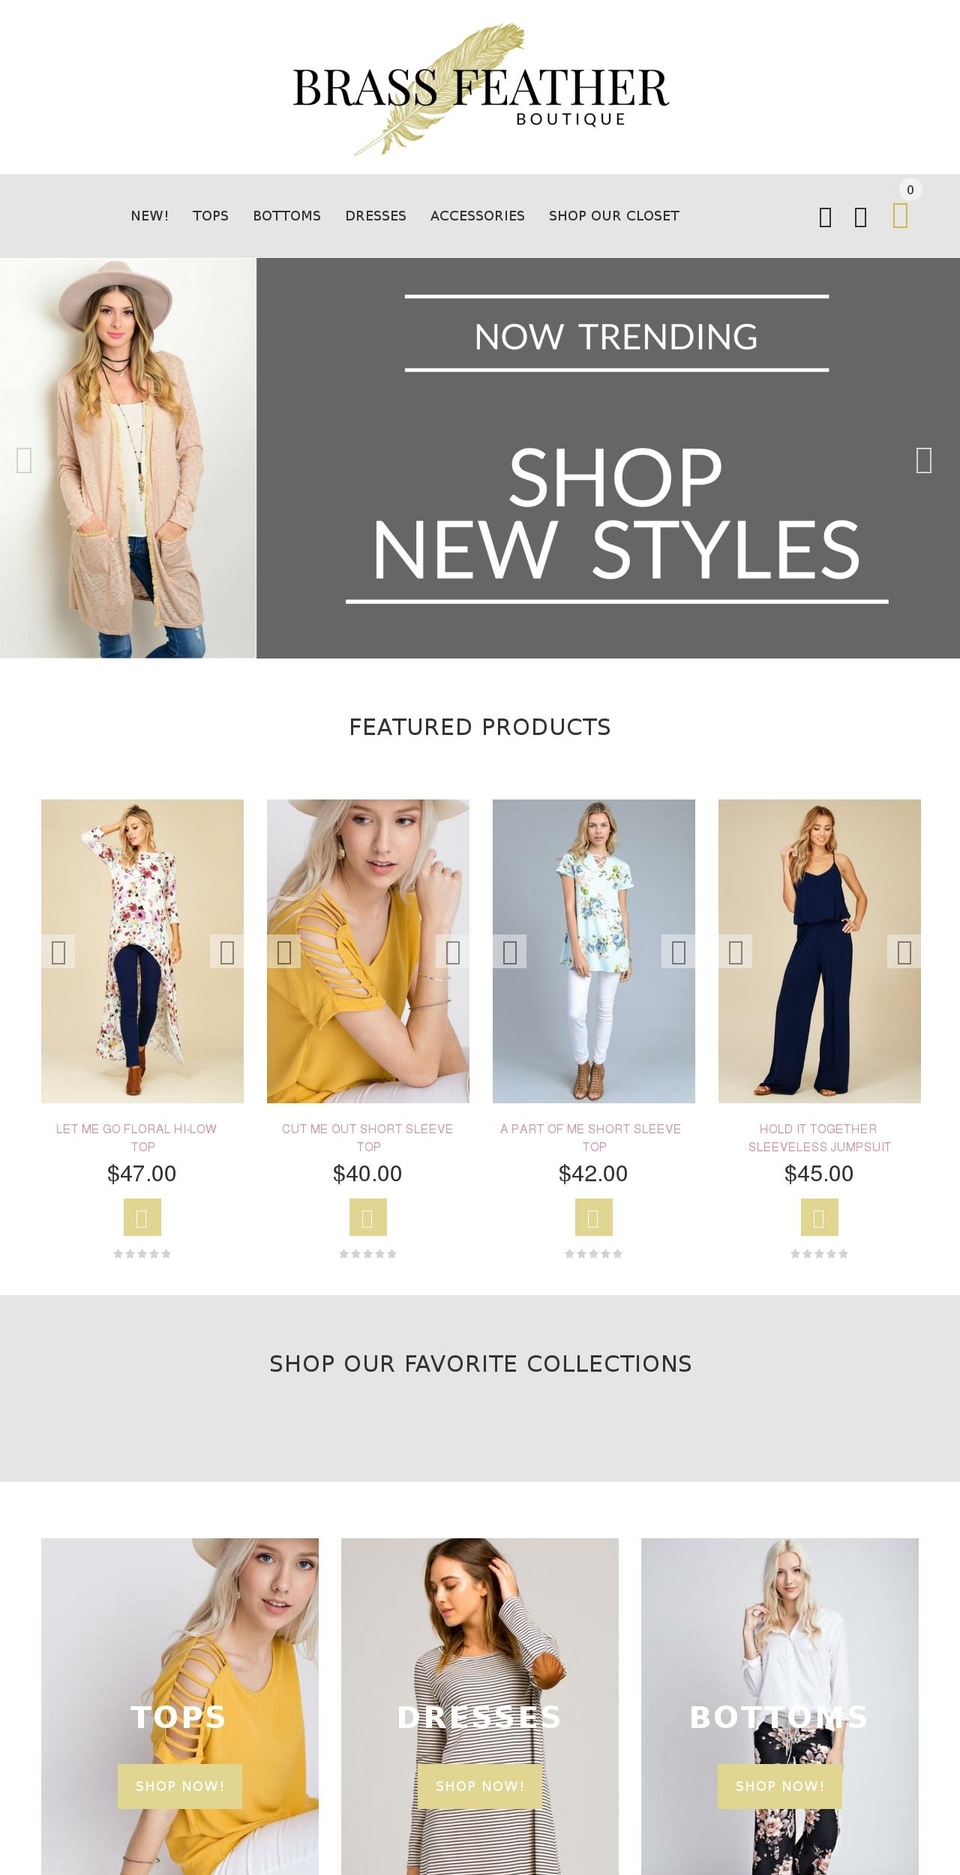 yourstore-v2-1-3 Shopify theme site example brassfeatherboutique.com